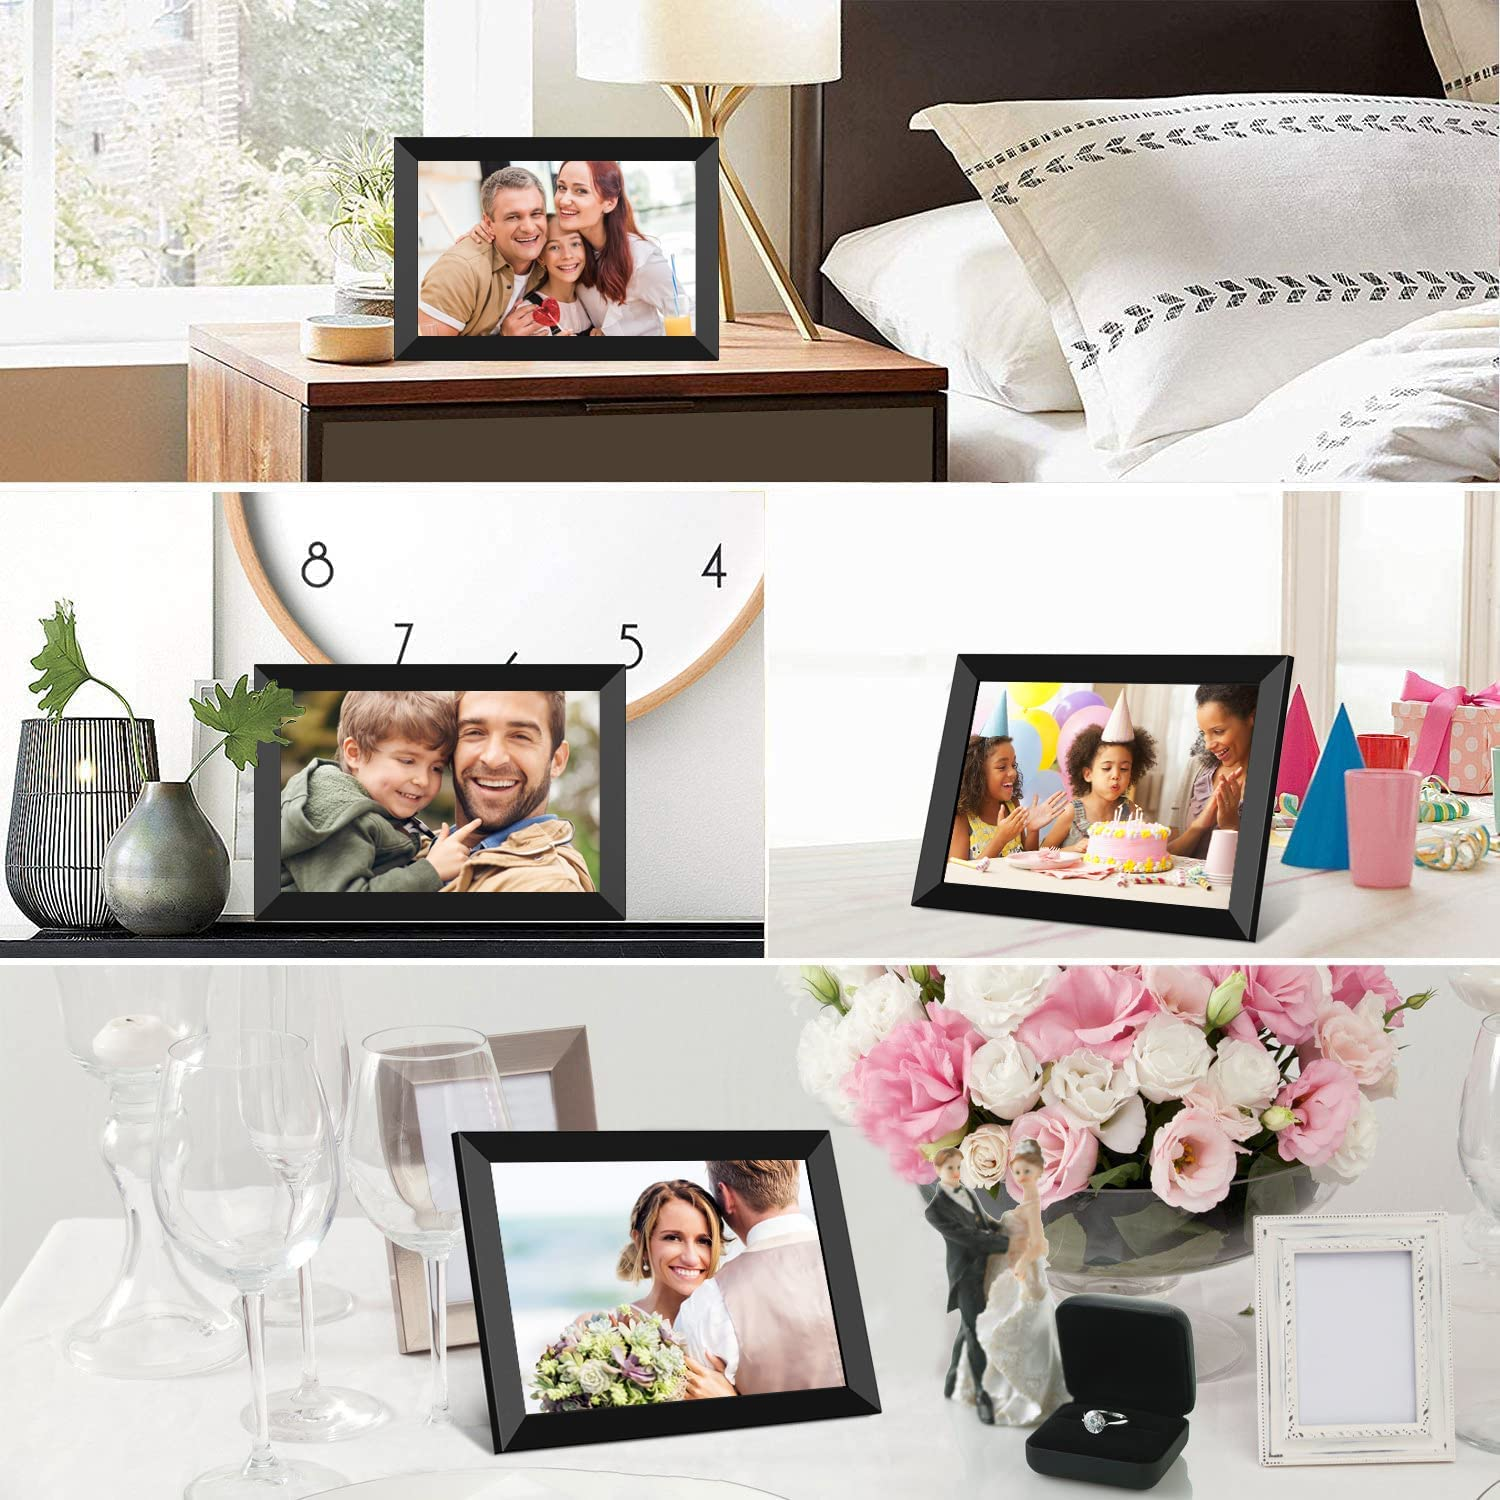 Digital Picture Frames, Electronic Photo Frame, IPS Screen 16:10 Upgrade Design, Photo/Music/Video Player/Calendar/Alarm with Remote Control, Support USB or SD Card, Auto-Rotate Wall Mountable, 8 Inch